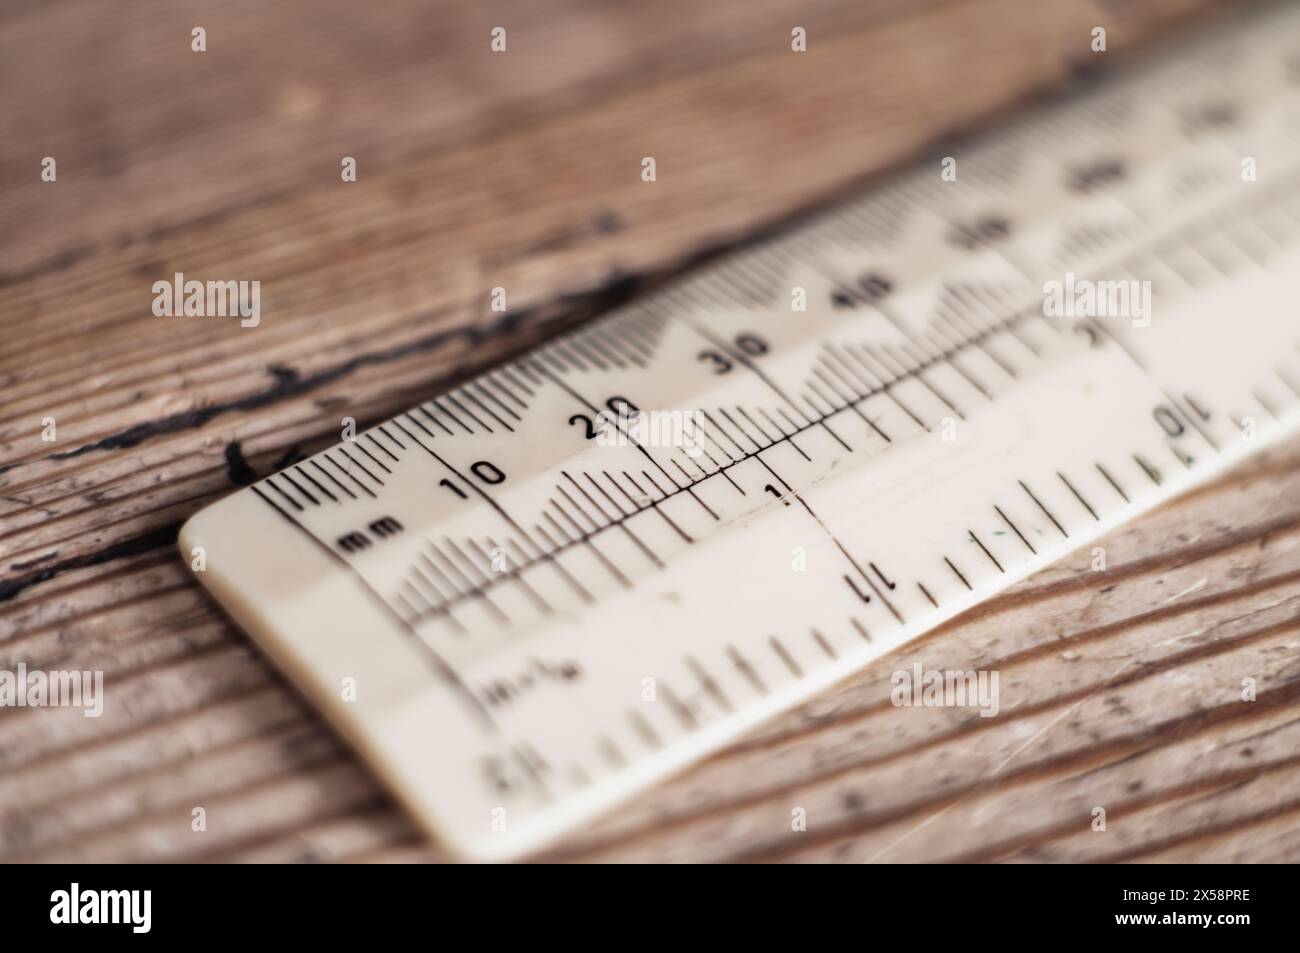 Close up of millimeter scale on a ruler Stock Photo